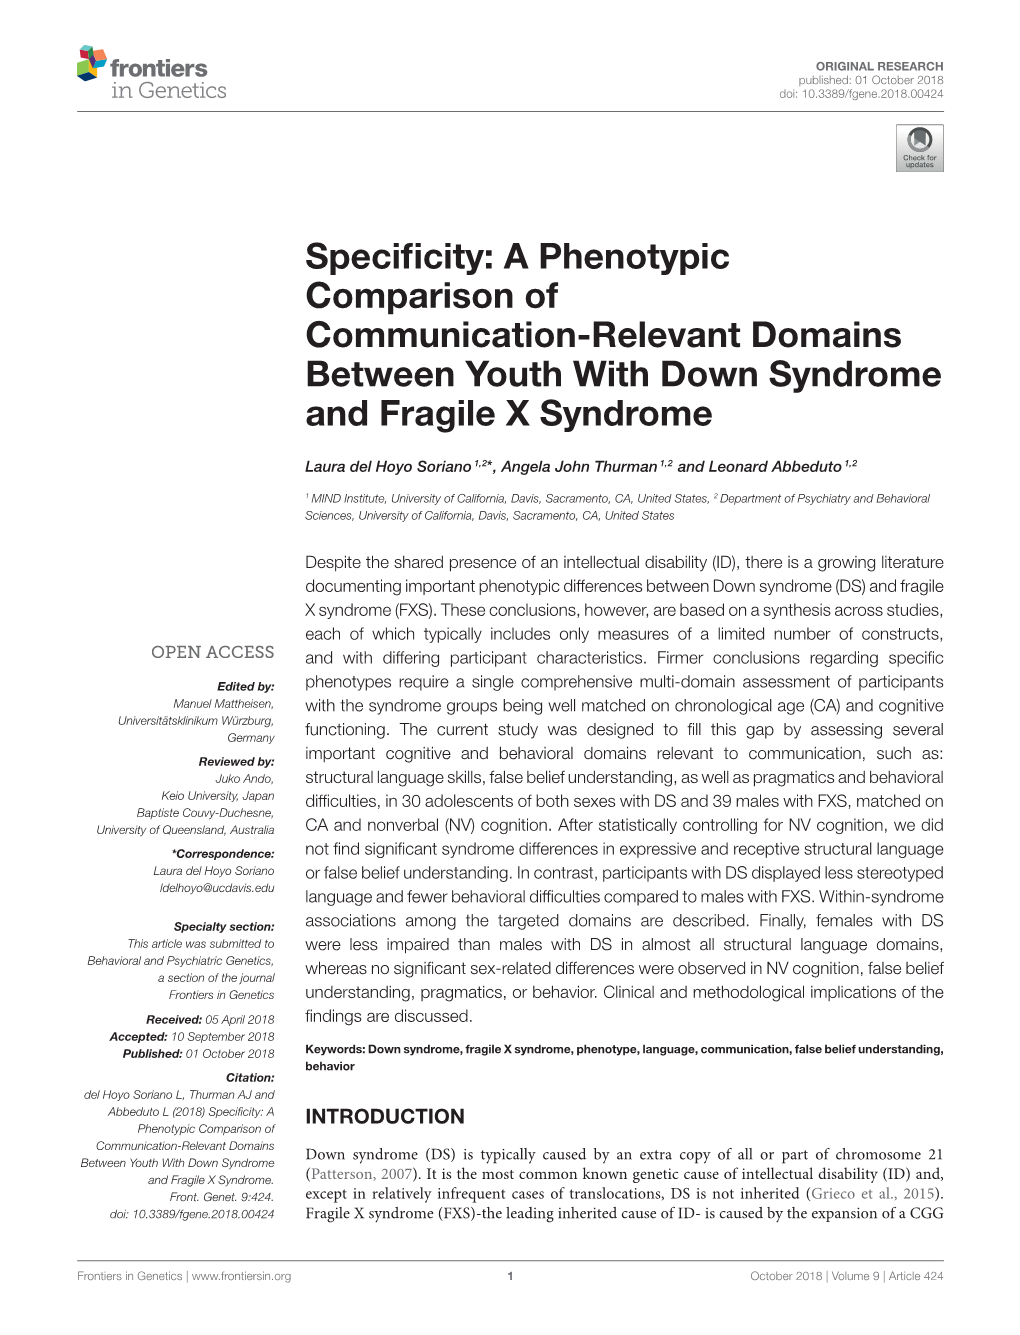 A Phenotypic Comparison of Communication-Relevant Domains Between Youth with Down Syndrome and Fragile X Syndrome